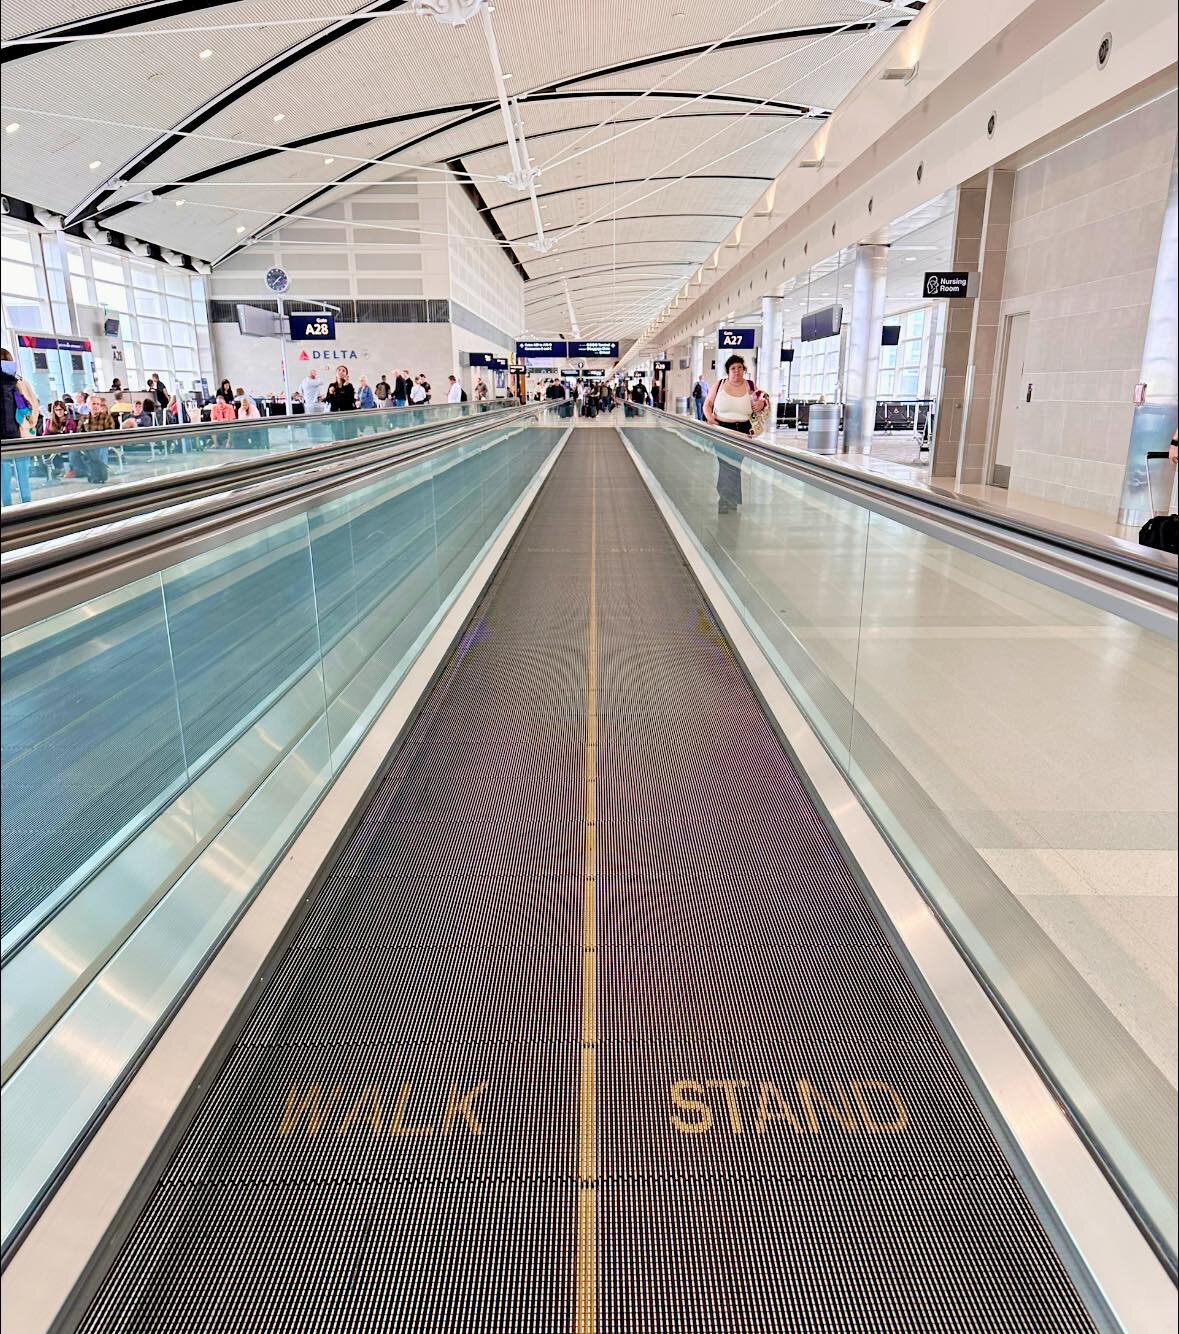 The Life Activation is a lot like these moving walkways. 

If you get on and stand there, you&rsquo;ll still move forward, you&rsquo;ll still get to the next section much easier than if you stand in place on stationary  walkways and expect the next a